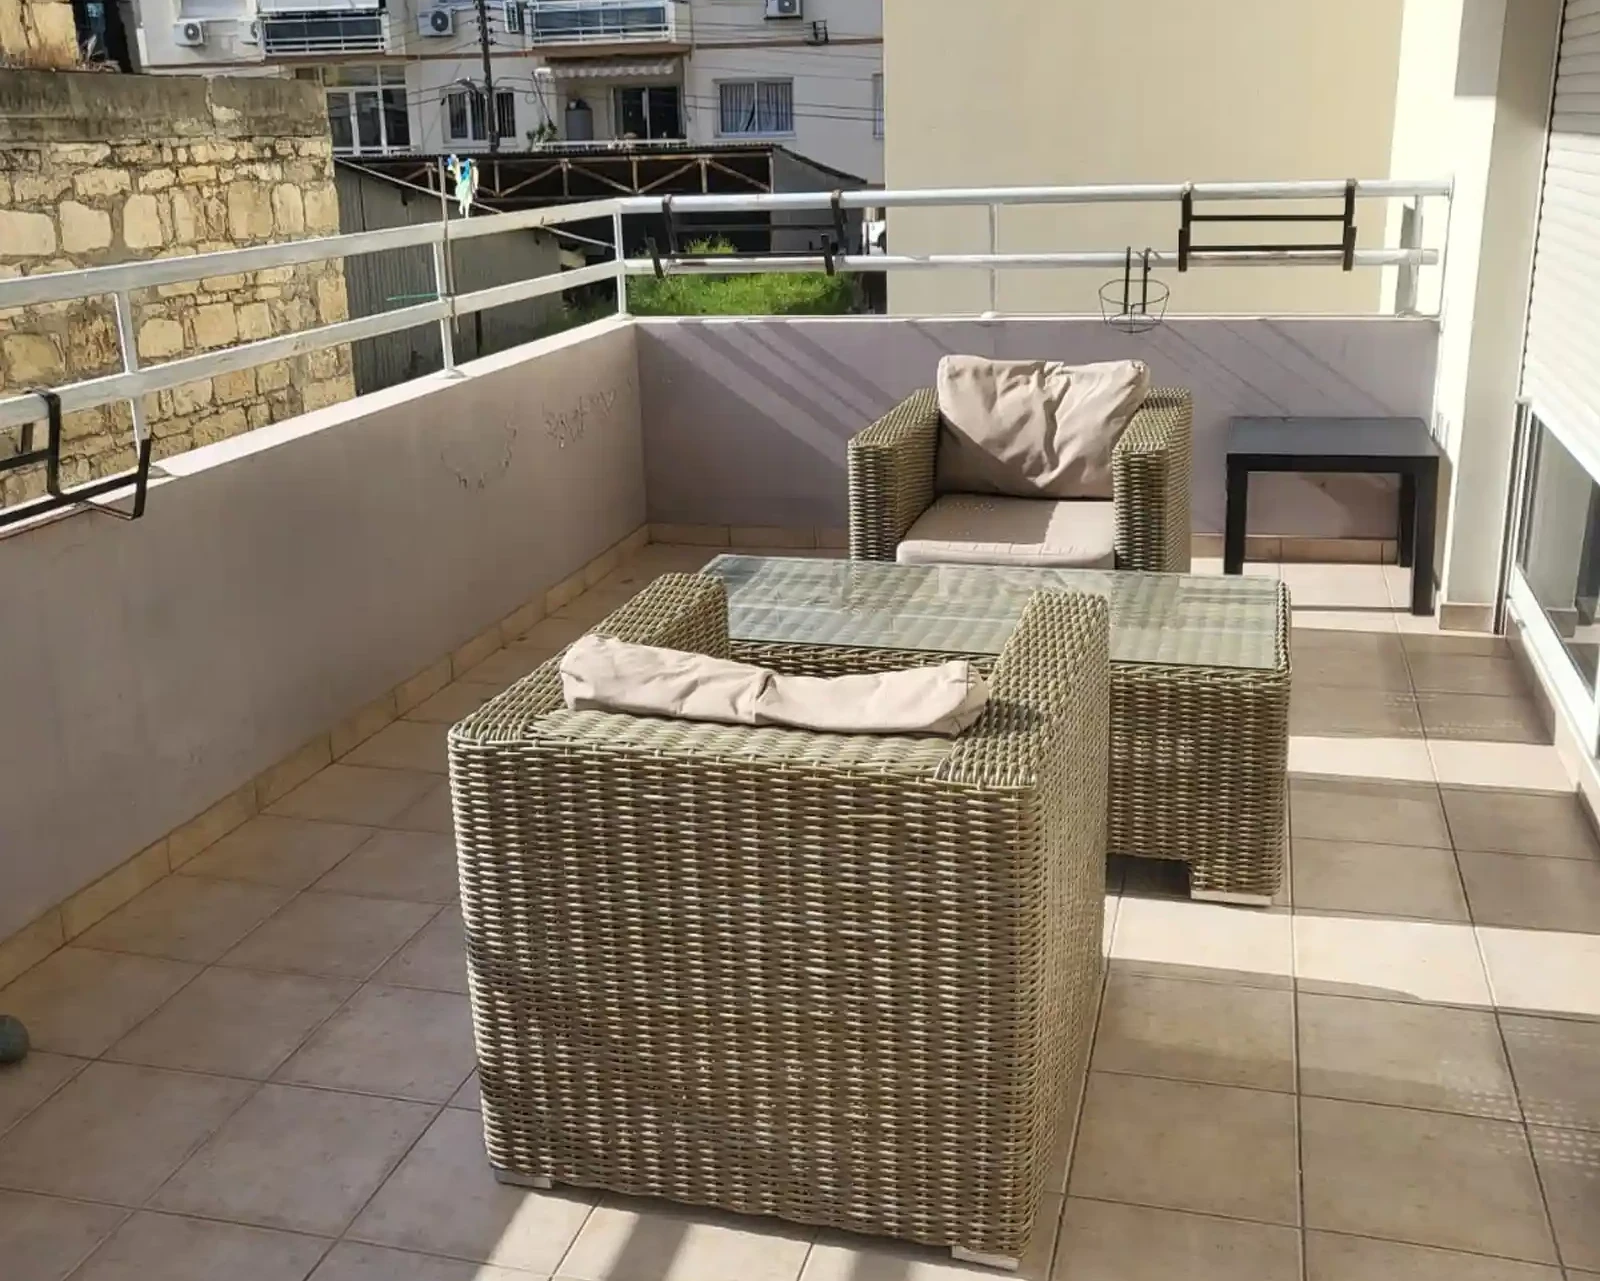 2-bedroom apartment fоr sаle €300.000, image 1